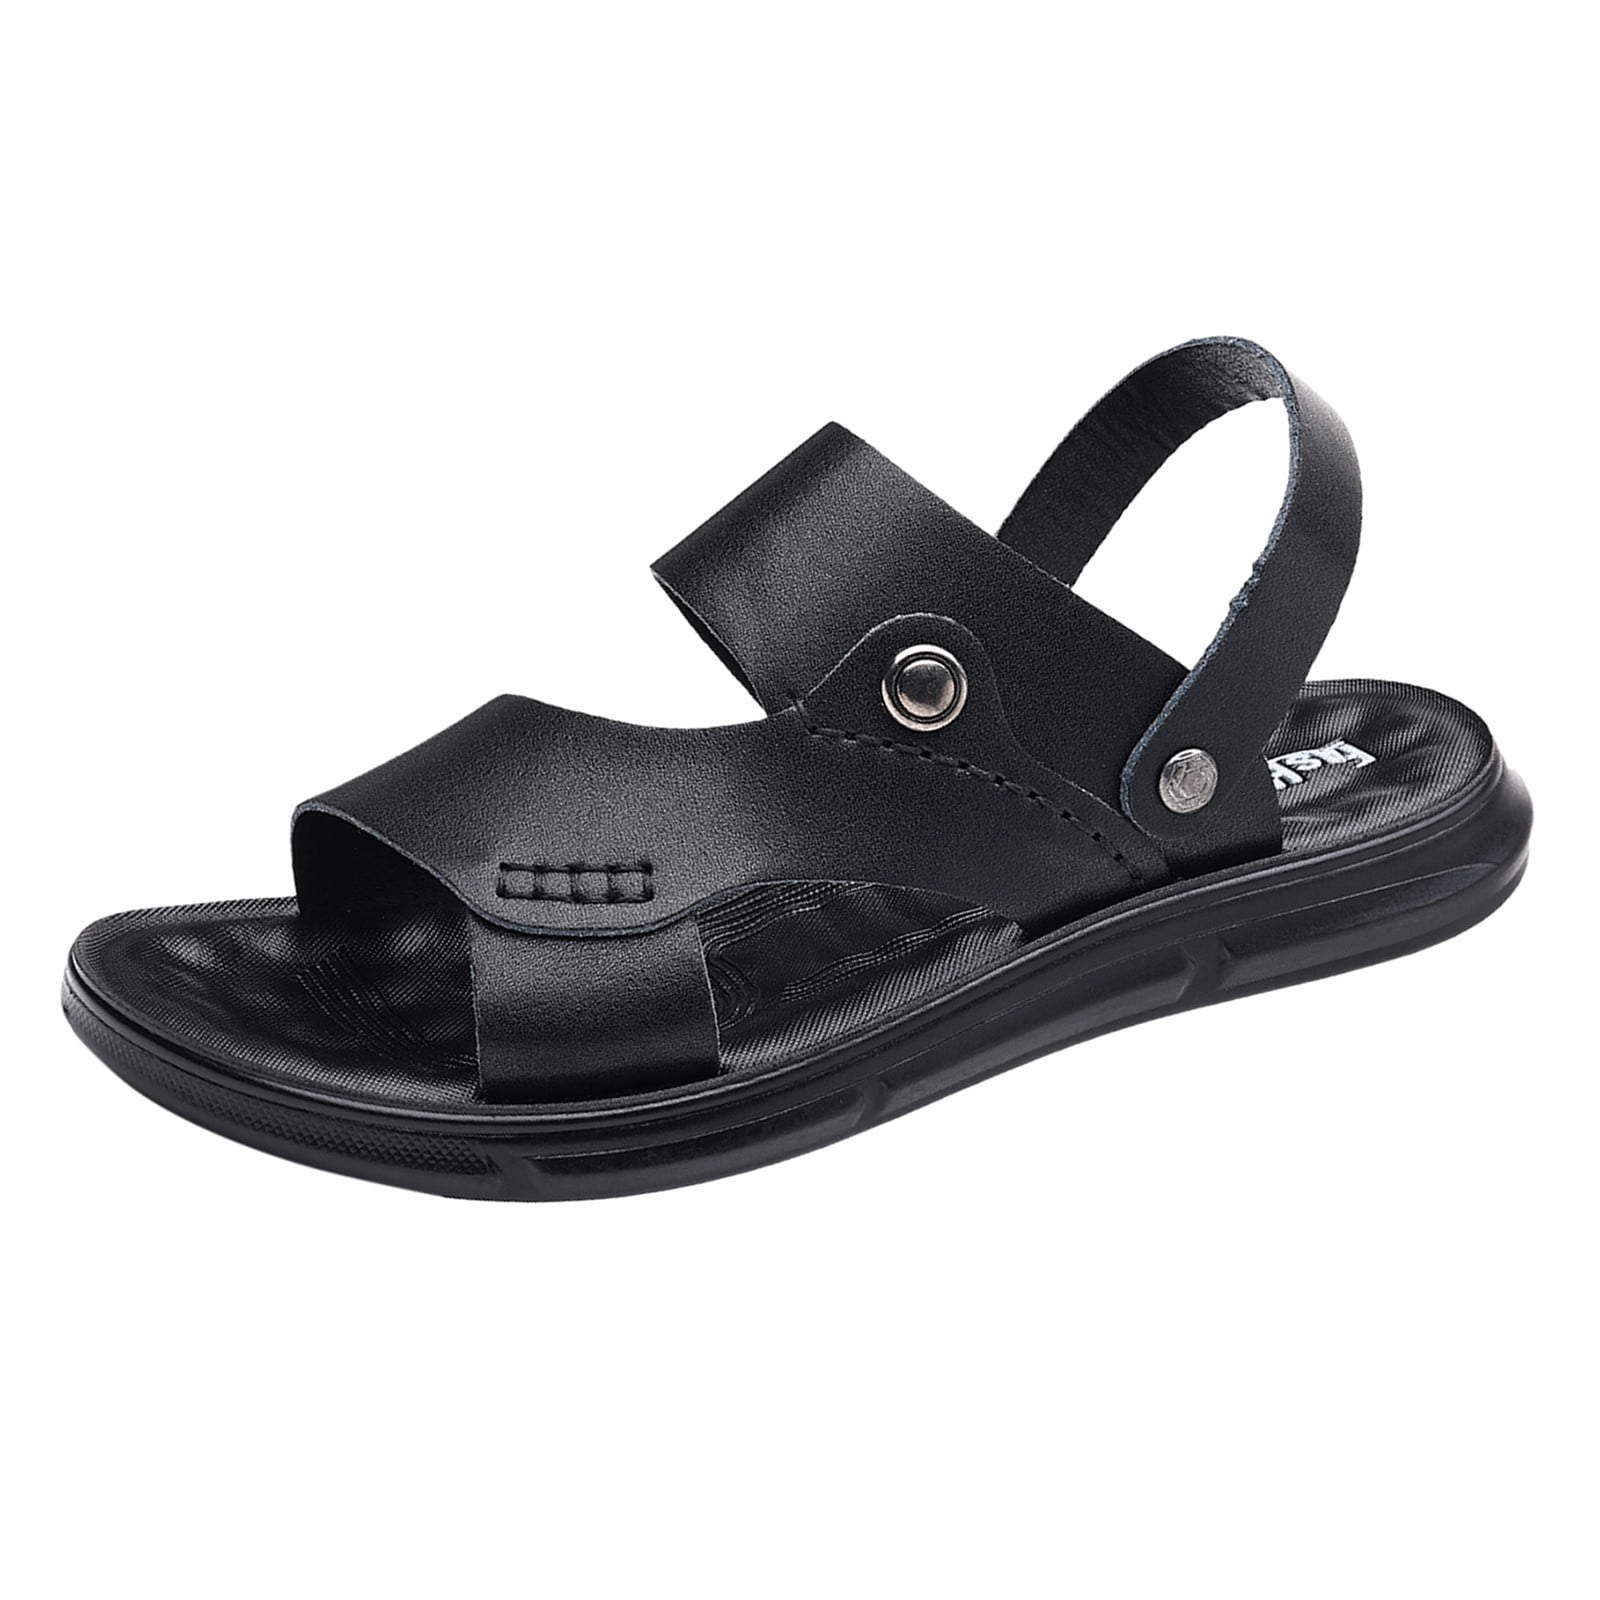 Unisex Designer F Sports Slippers: Black, White, And Blue Beach Sandals  With Box For Summer Leisure And Wear From Gndshoes, $47.57 | DHgate.Com